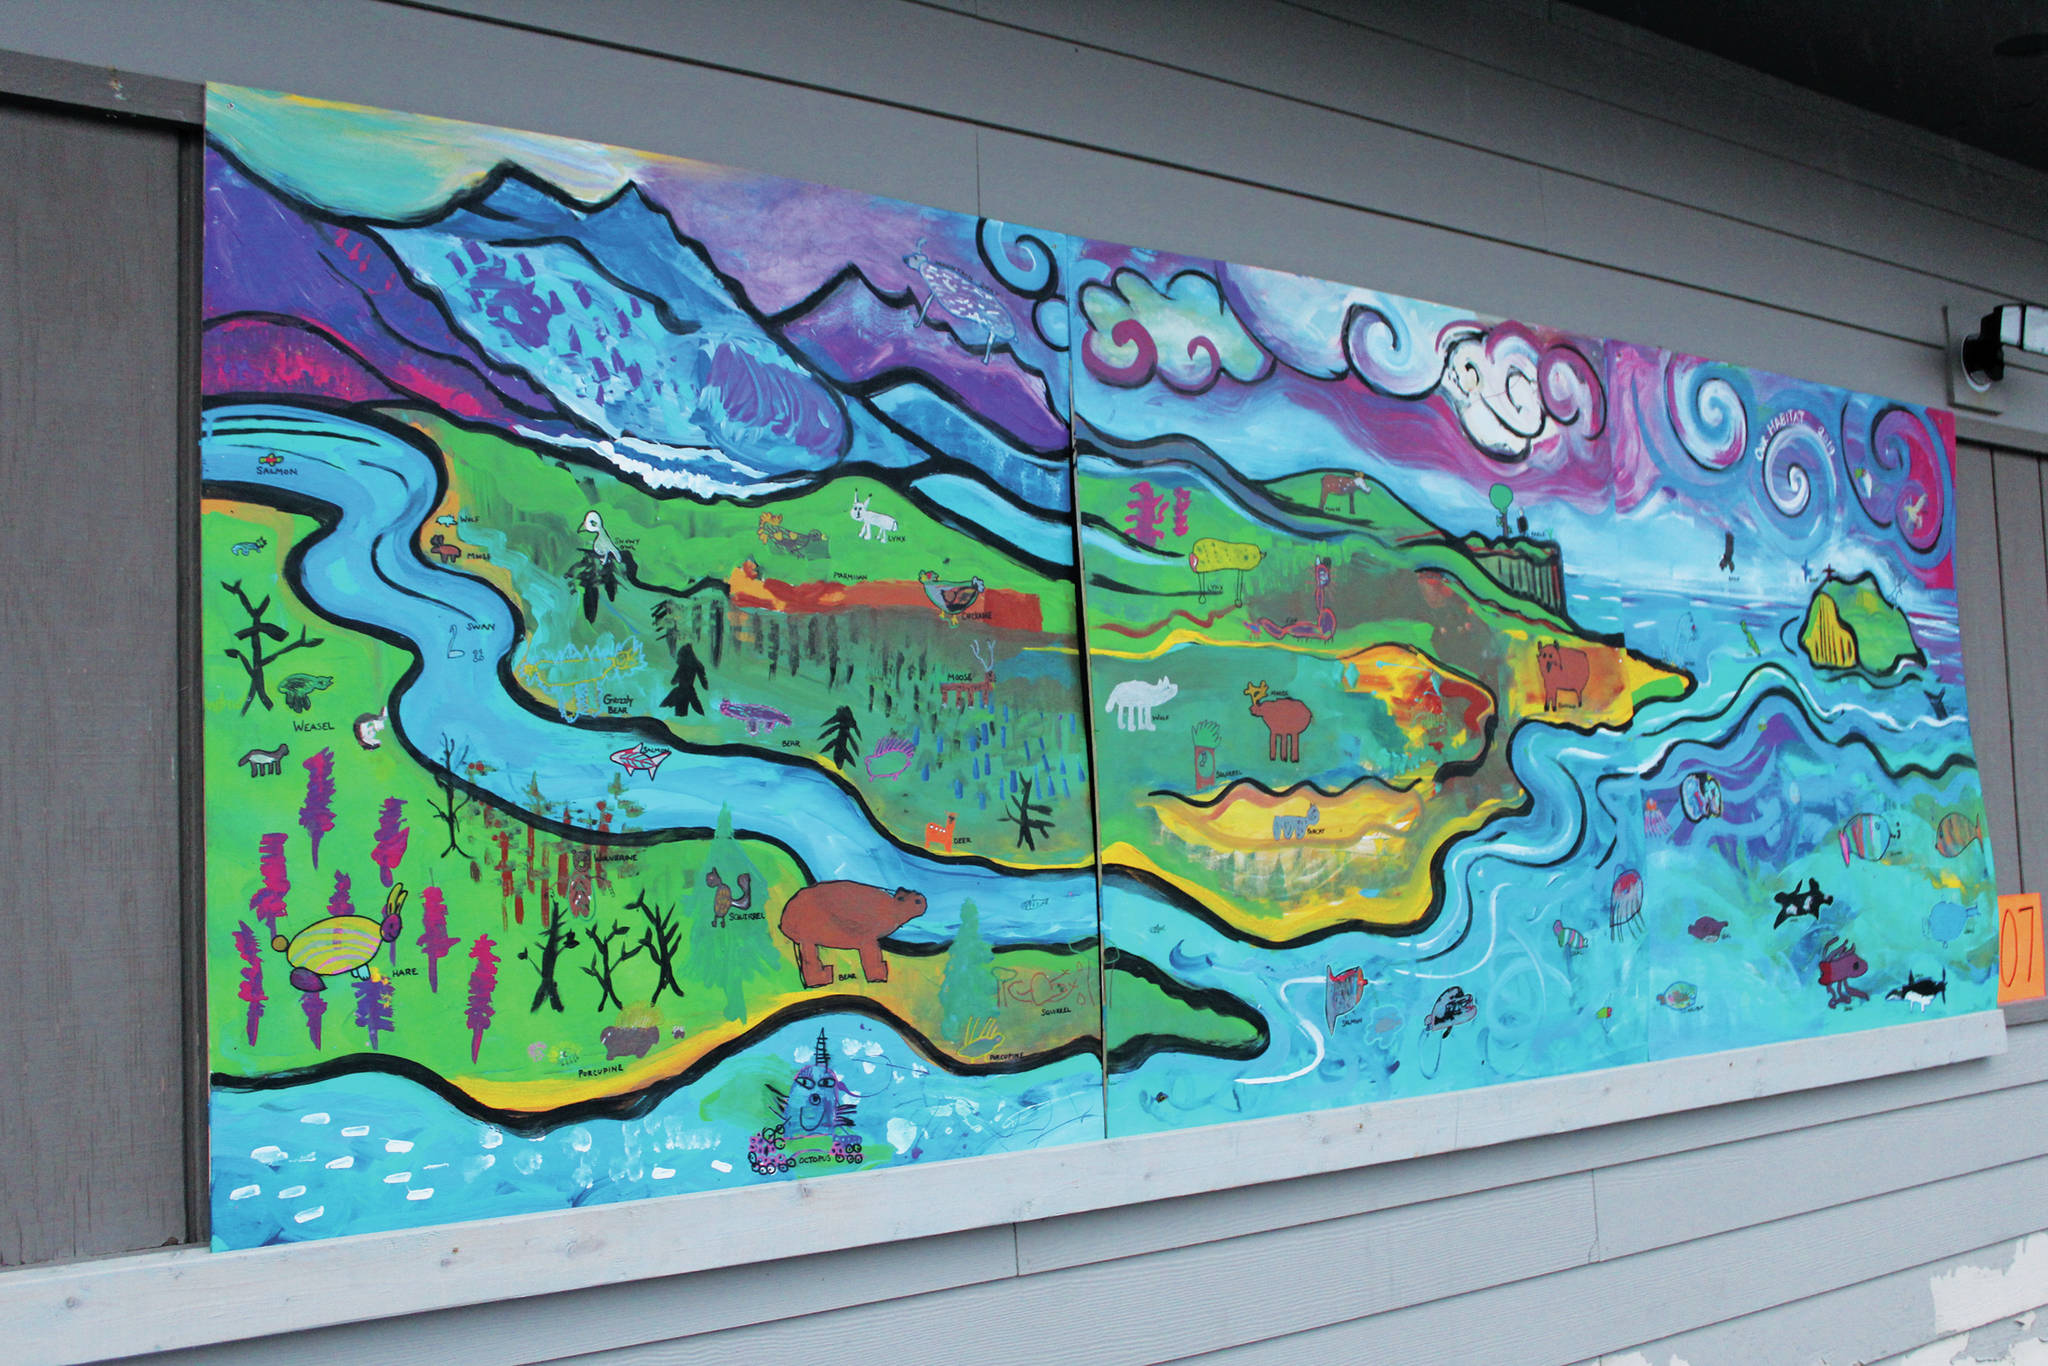 Fireweed Academy students take art to next level with public mural